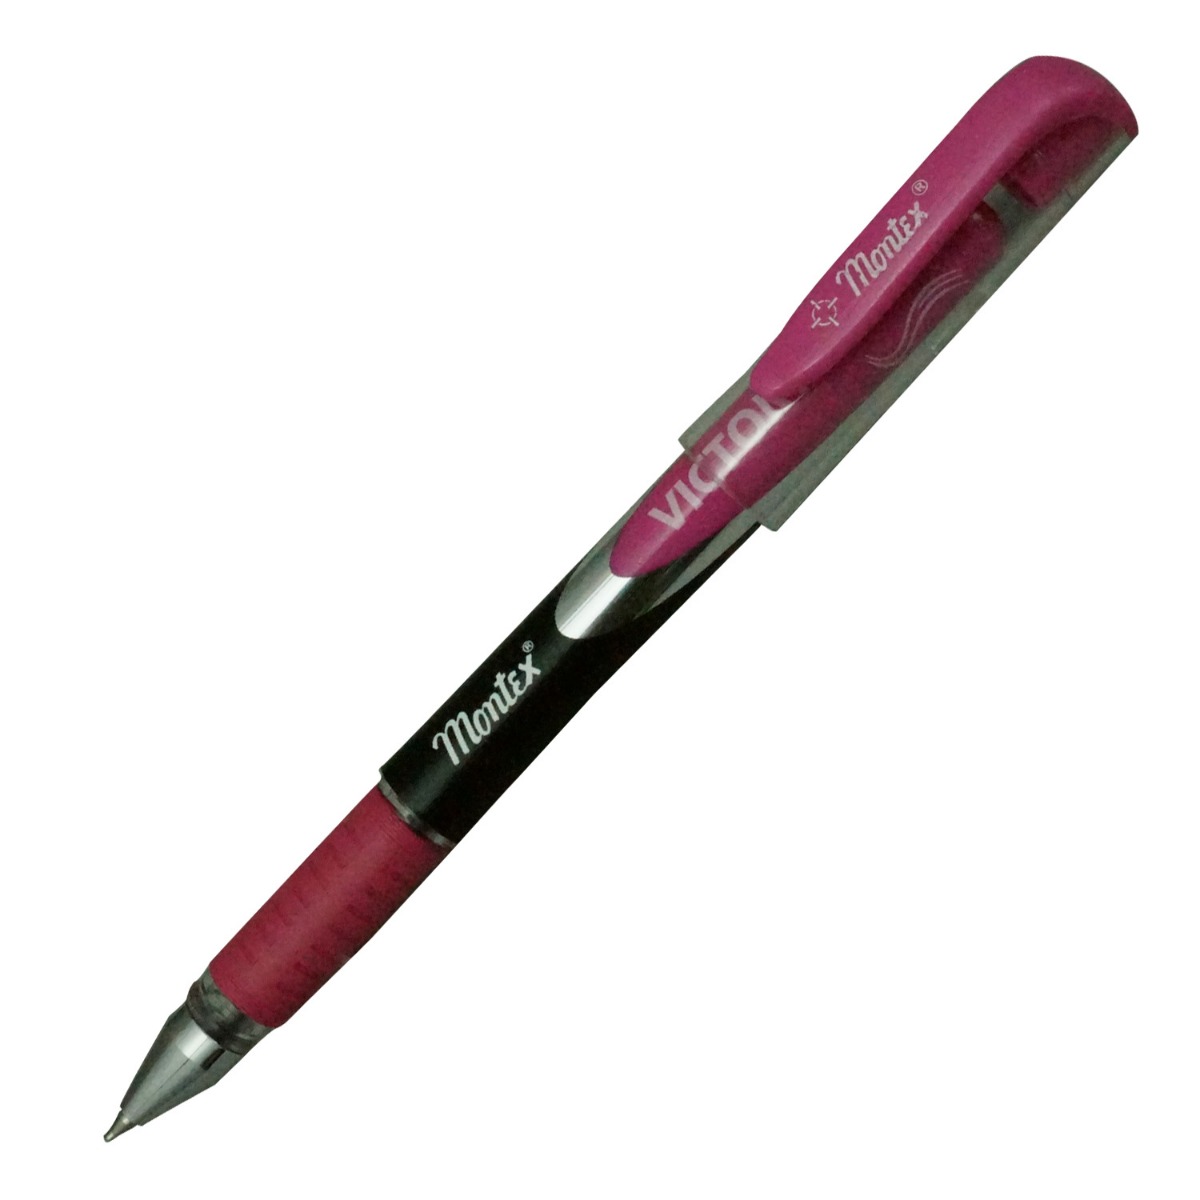 Montex Victory Model:16295 Pink Color Body With Blue Writing Cap Type Ball Pen